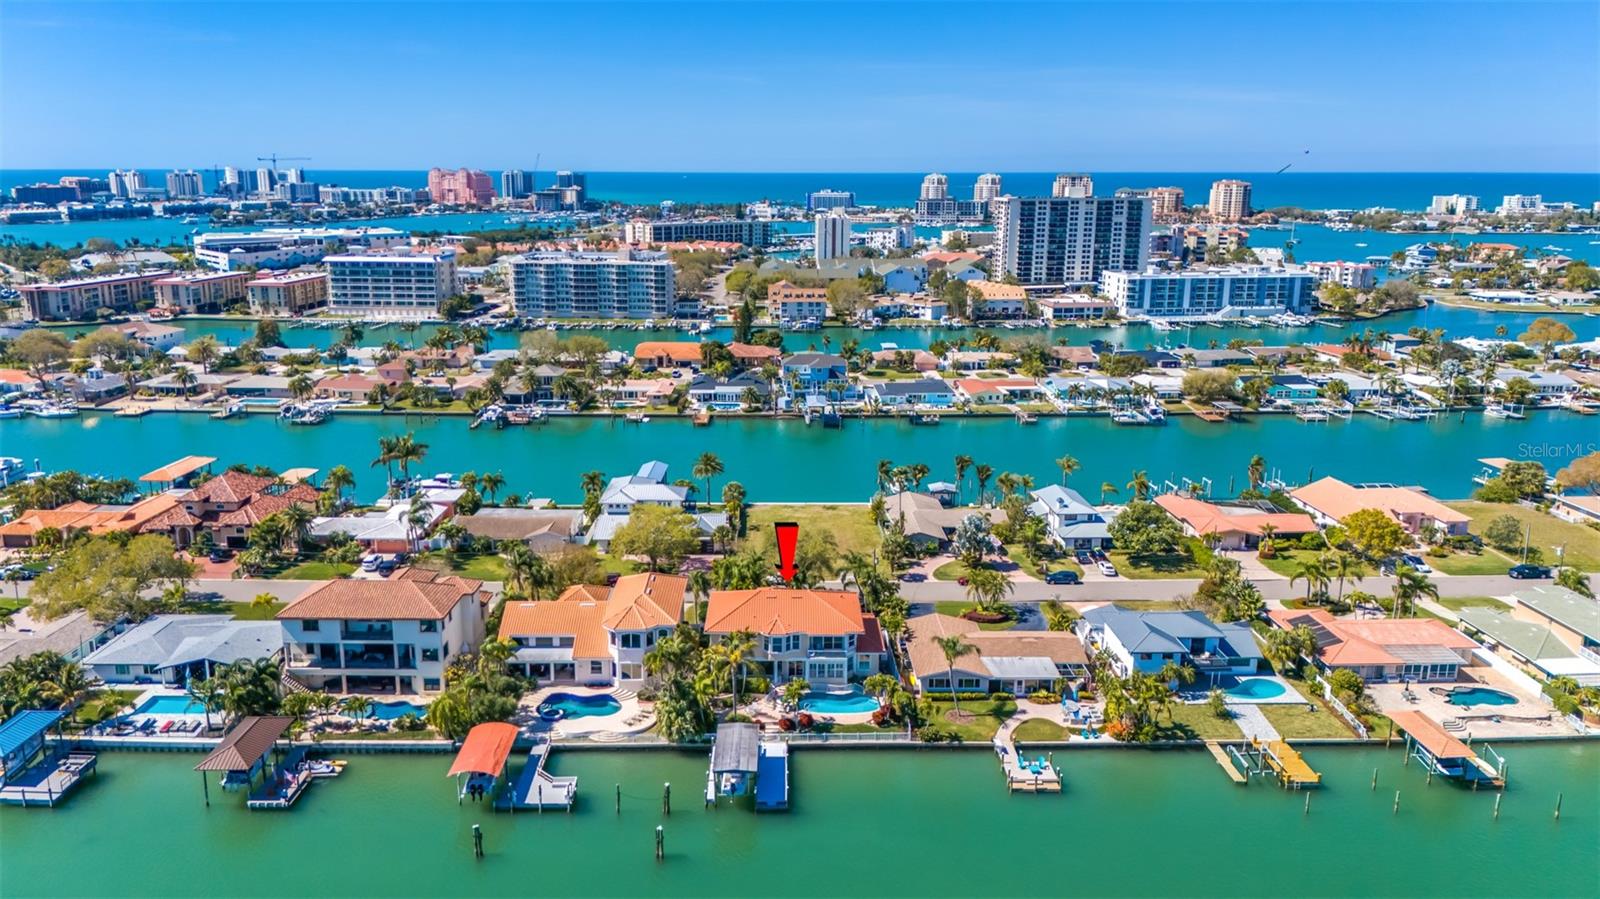 Aerial view facing due west towards Island Estates condominiums and Clearwater Beach